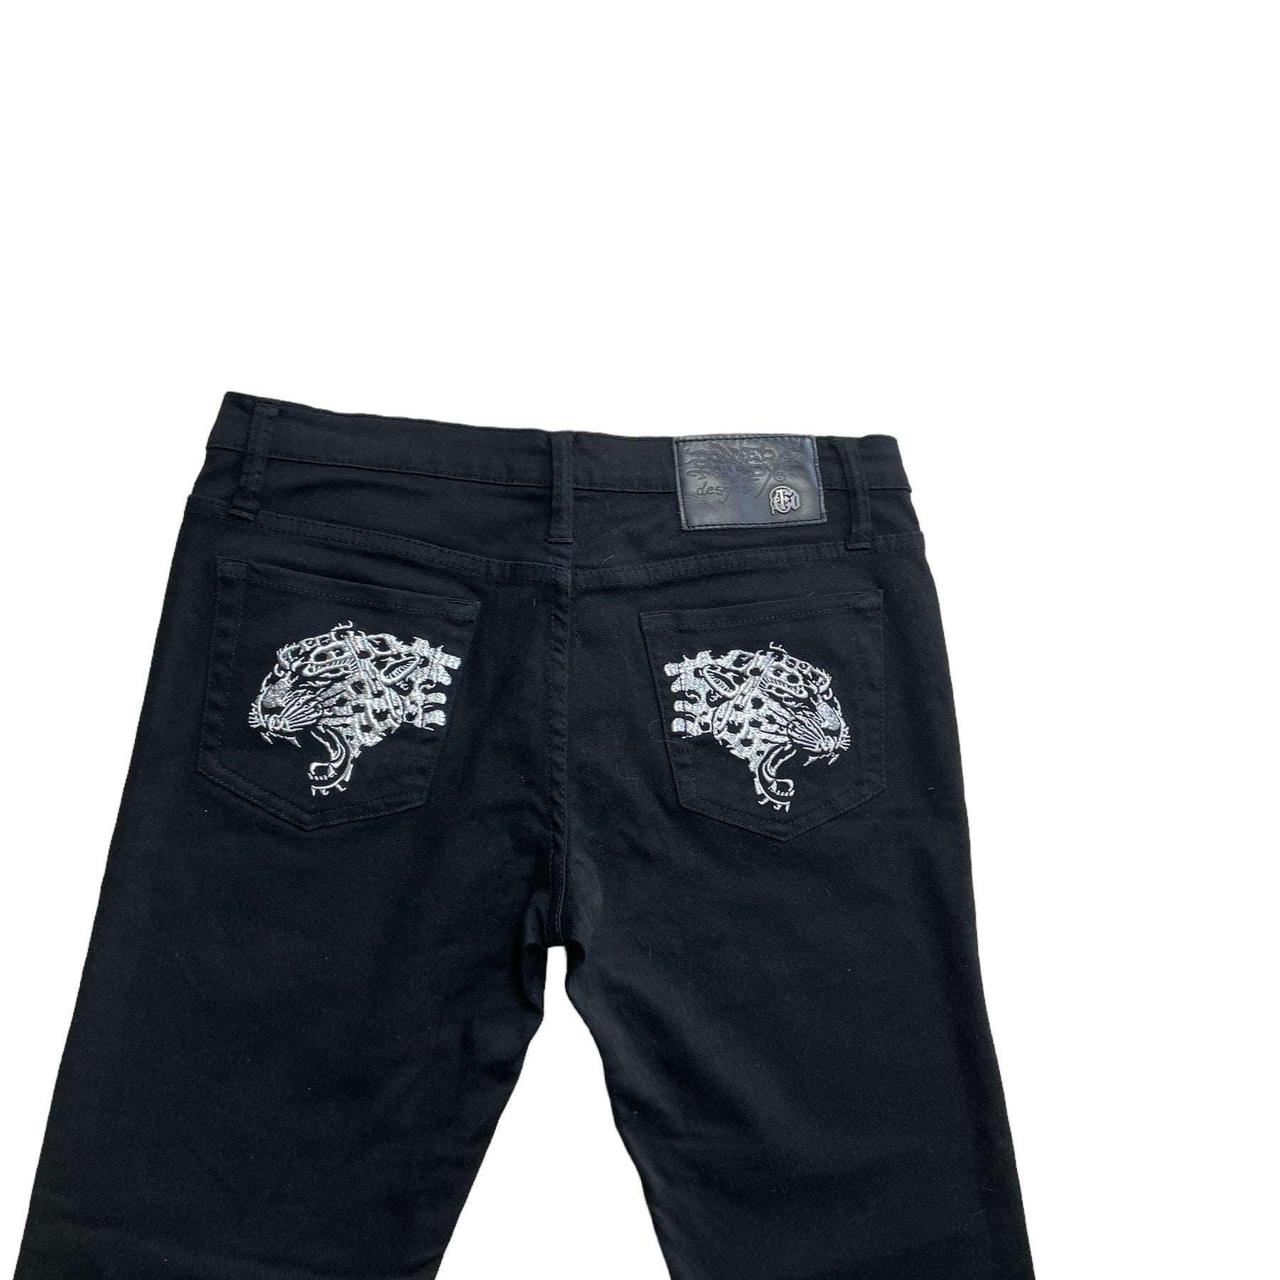 Ed Hardy Jeans *NEW* Introducing the Ed Hardy... - Depop